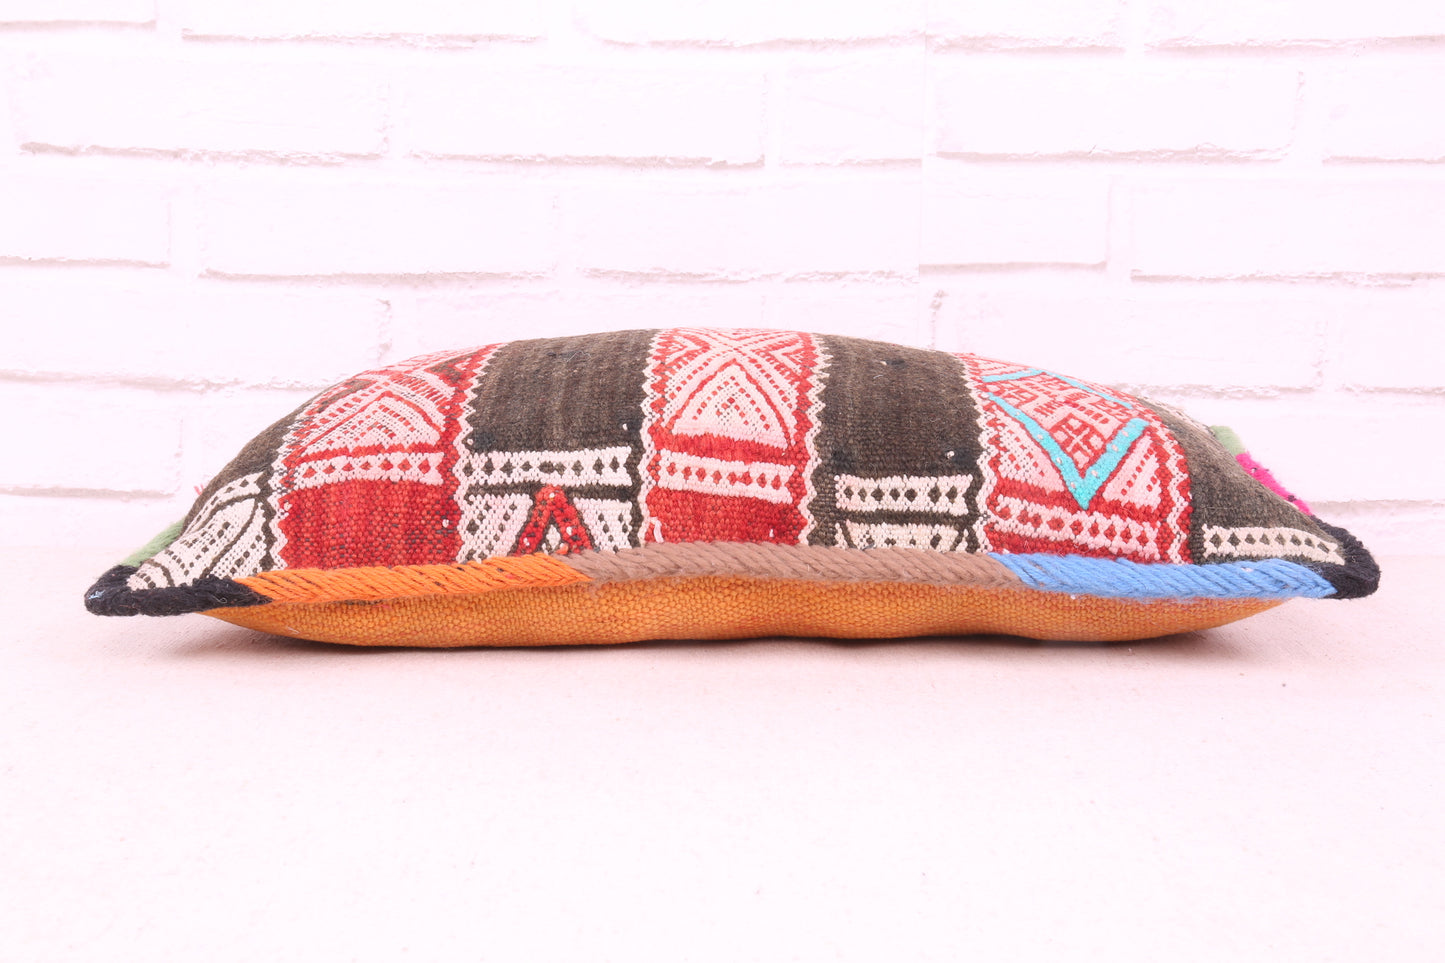 Moroccan vintage pillow 12.5 inches X 21.2 inches